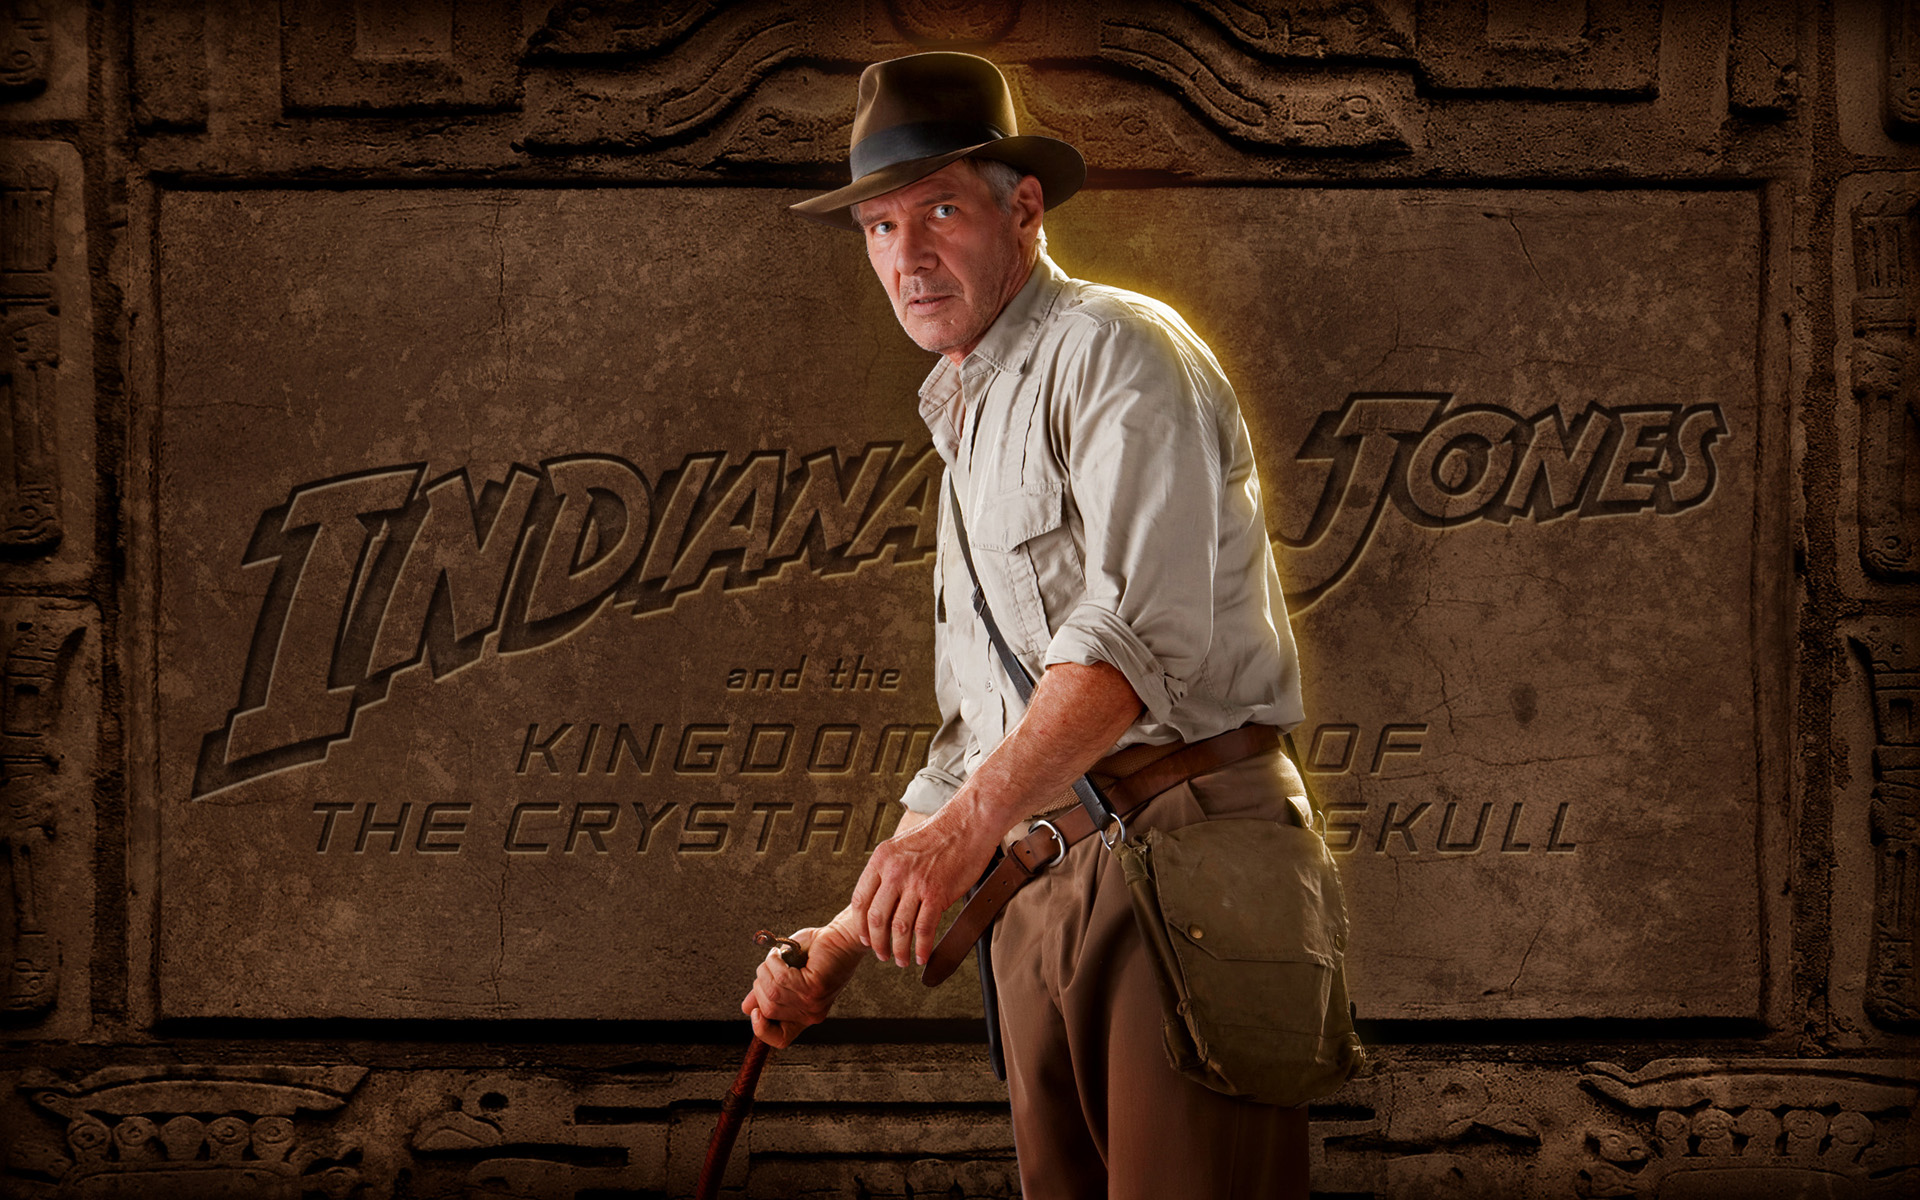 Archaeologist Indiana Jones wallpapers and images   wallpapers